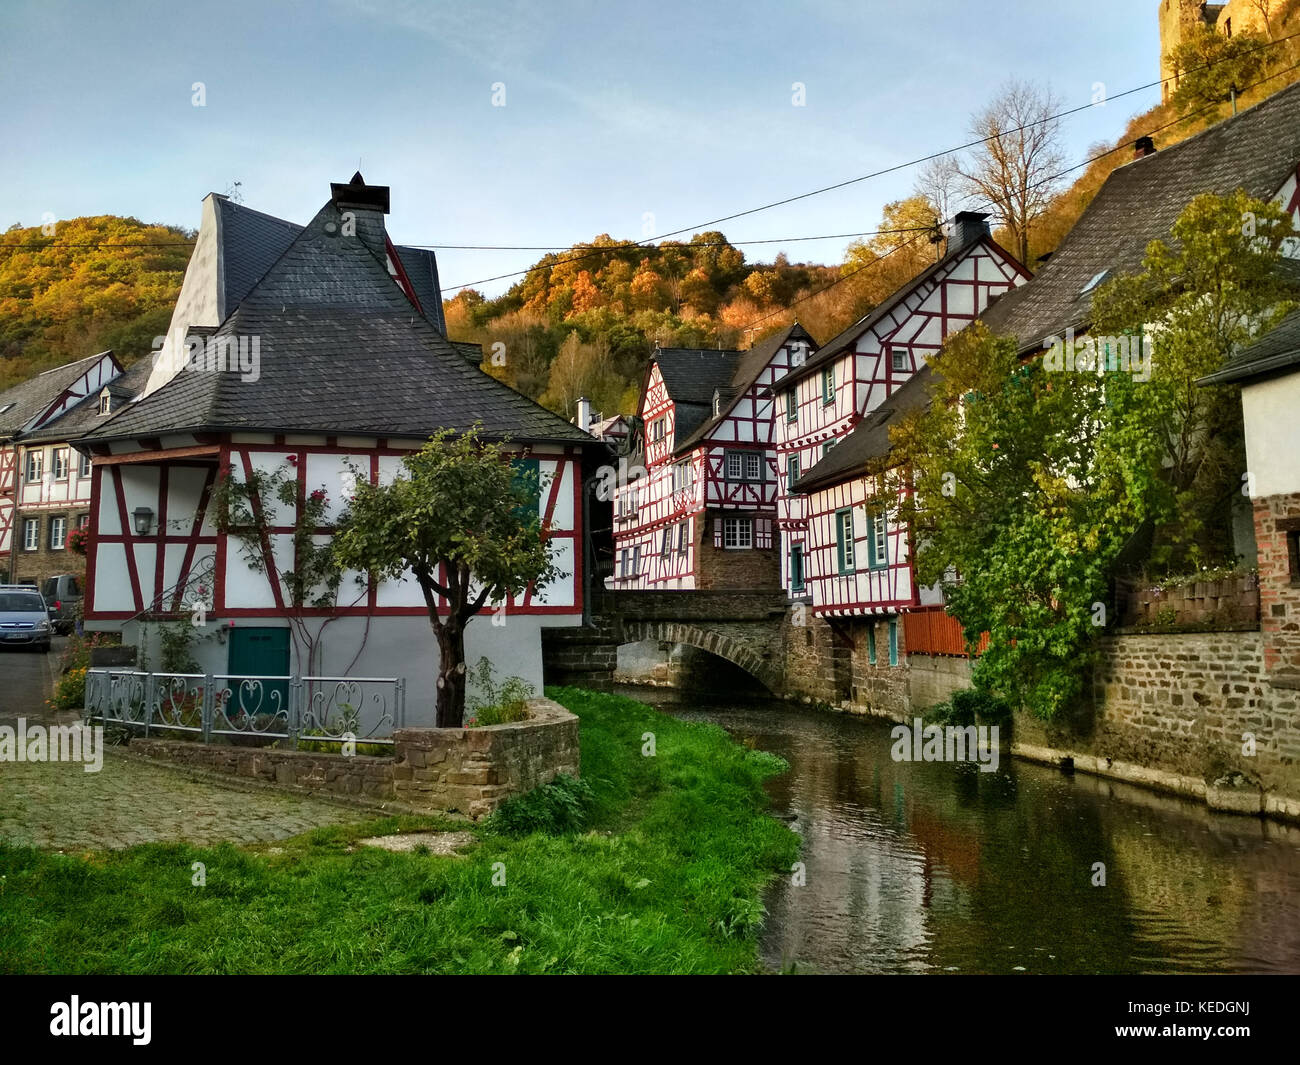 Monreal, one of the most beautiful towns in the Eifel, Germany. Stock Photo